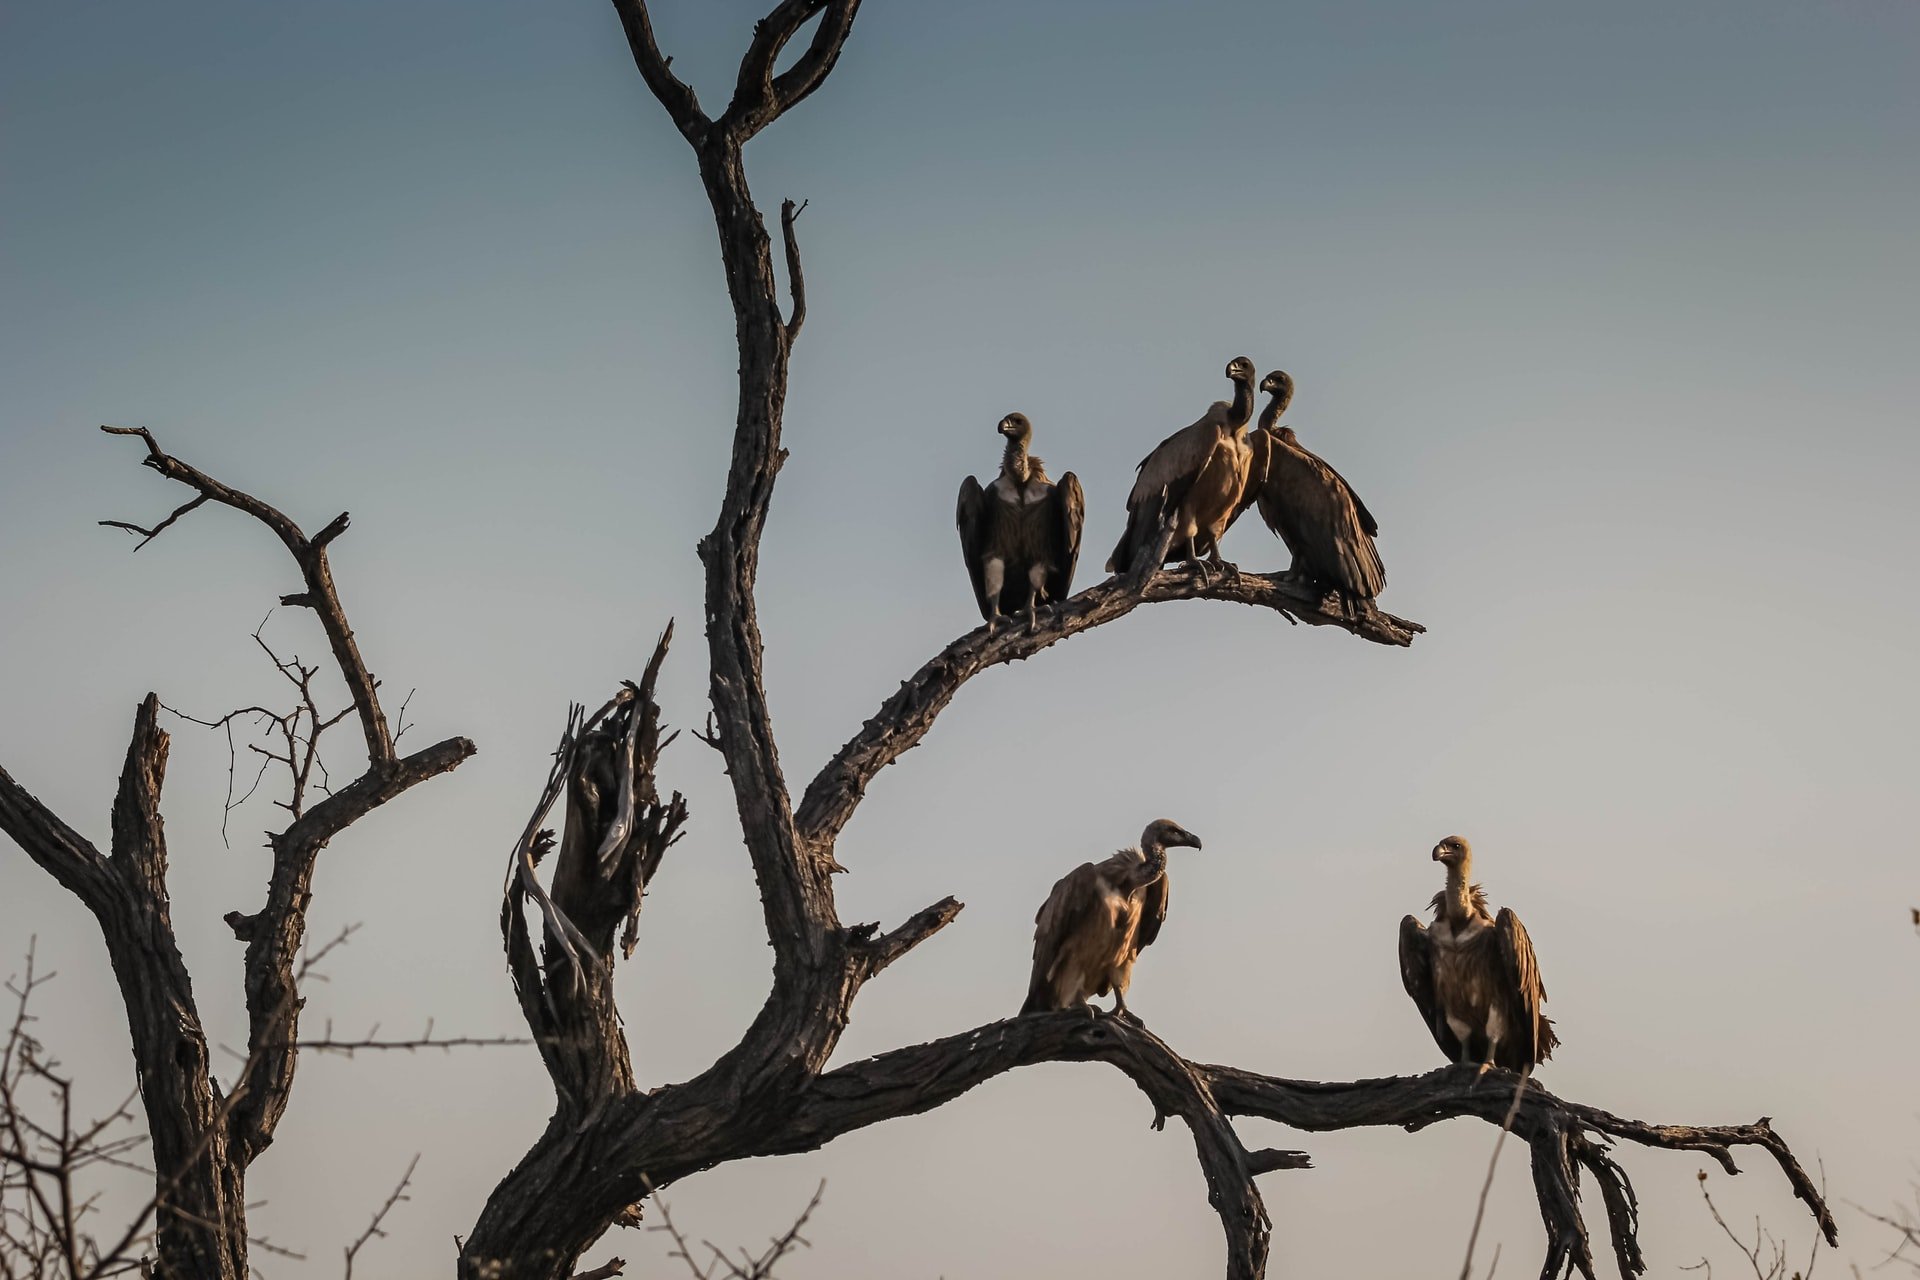 Vultures in a tree in South Africa